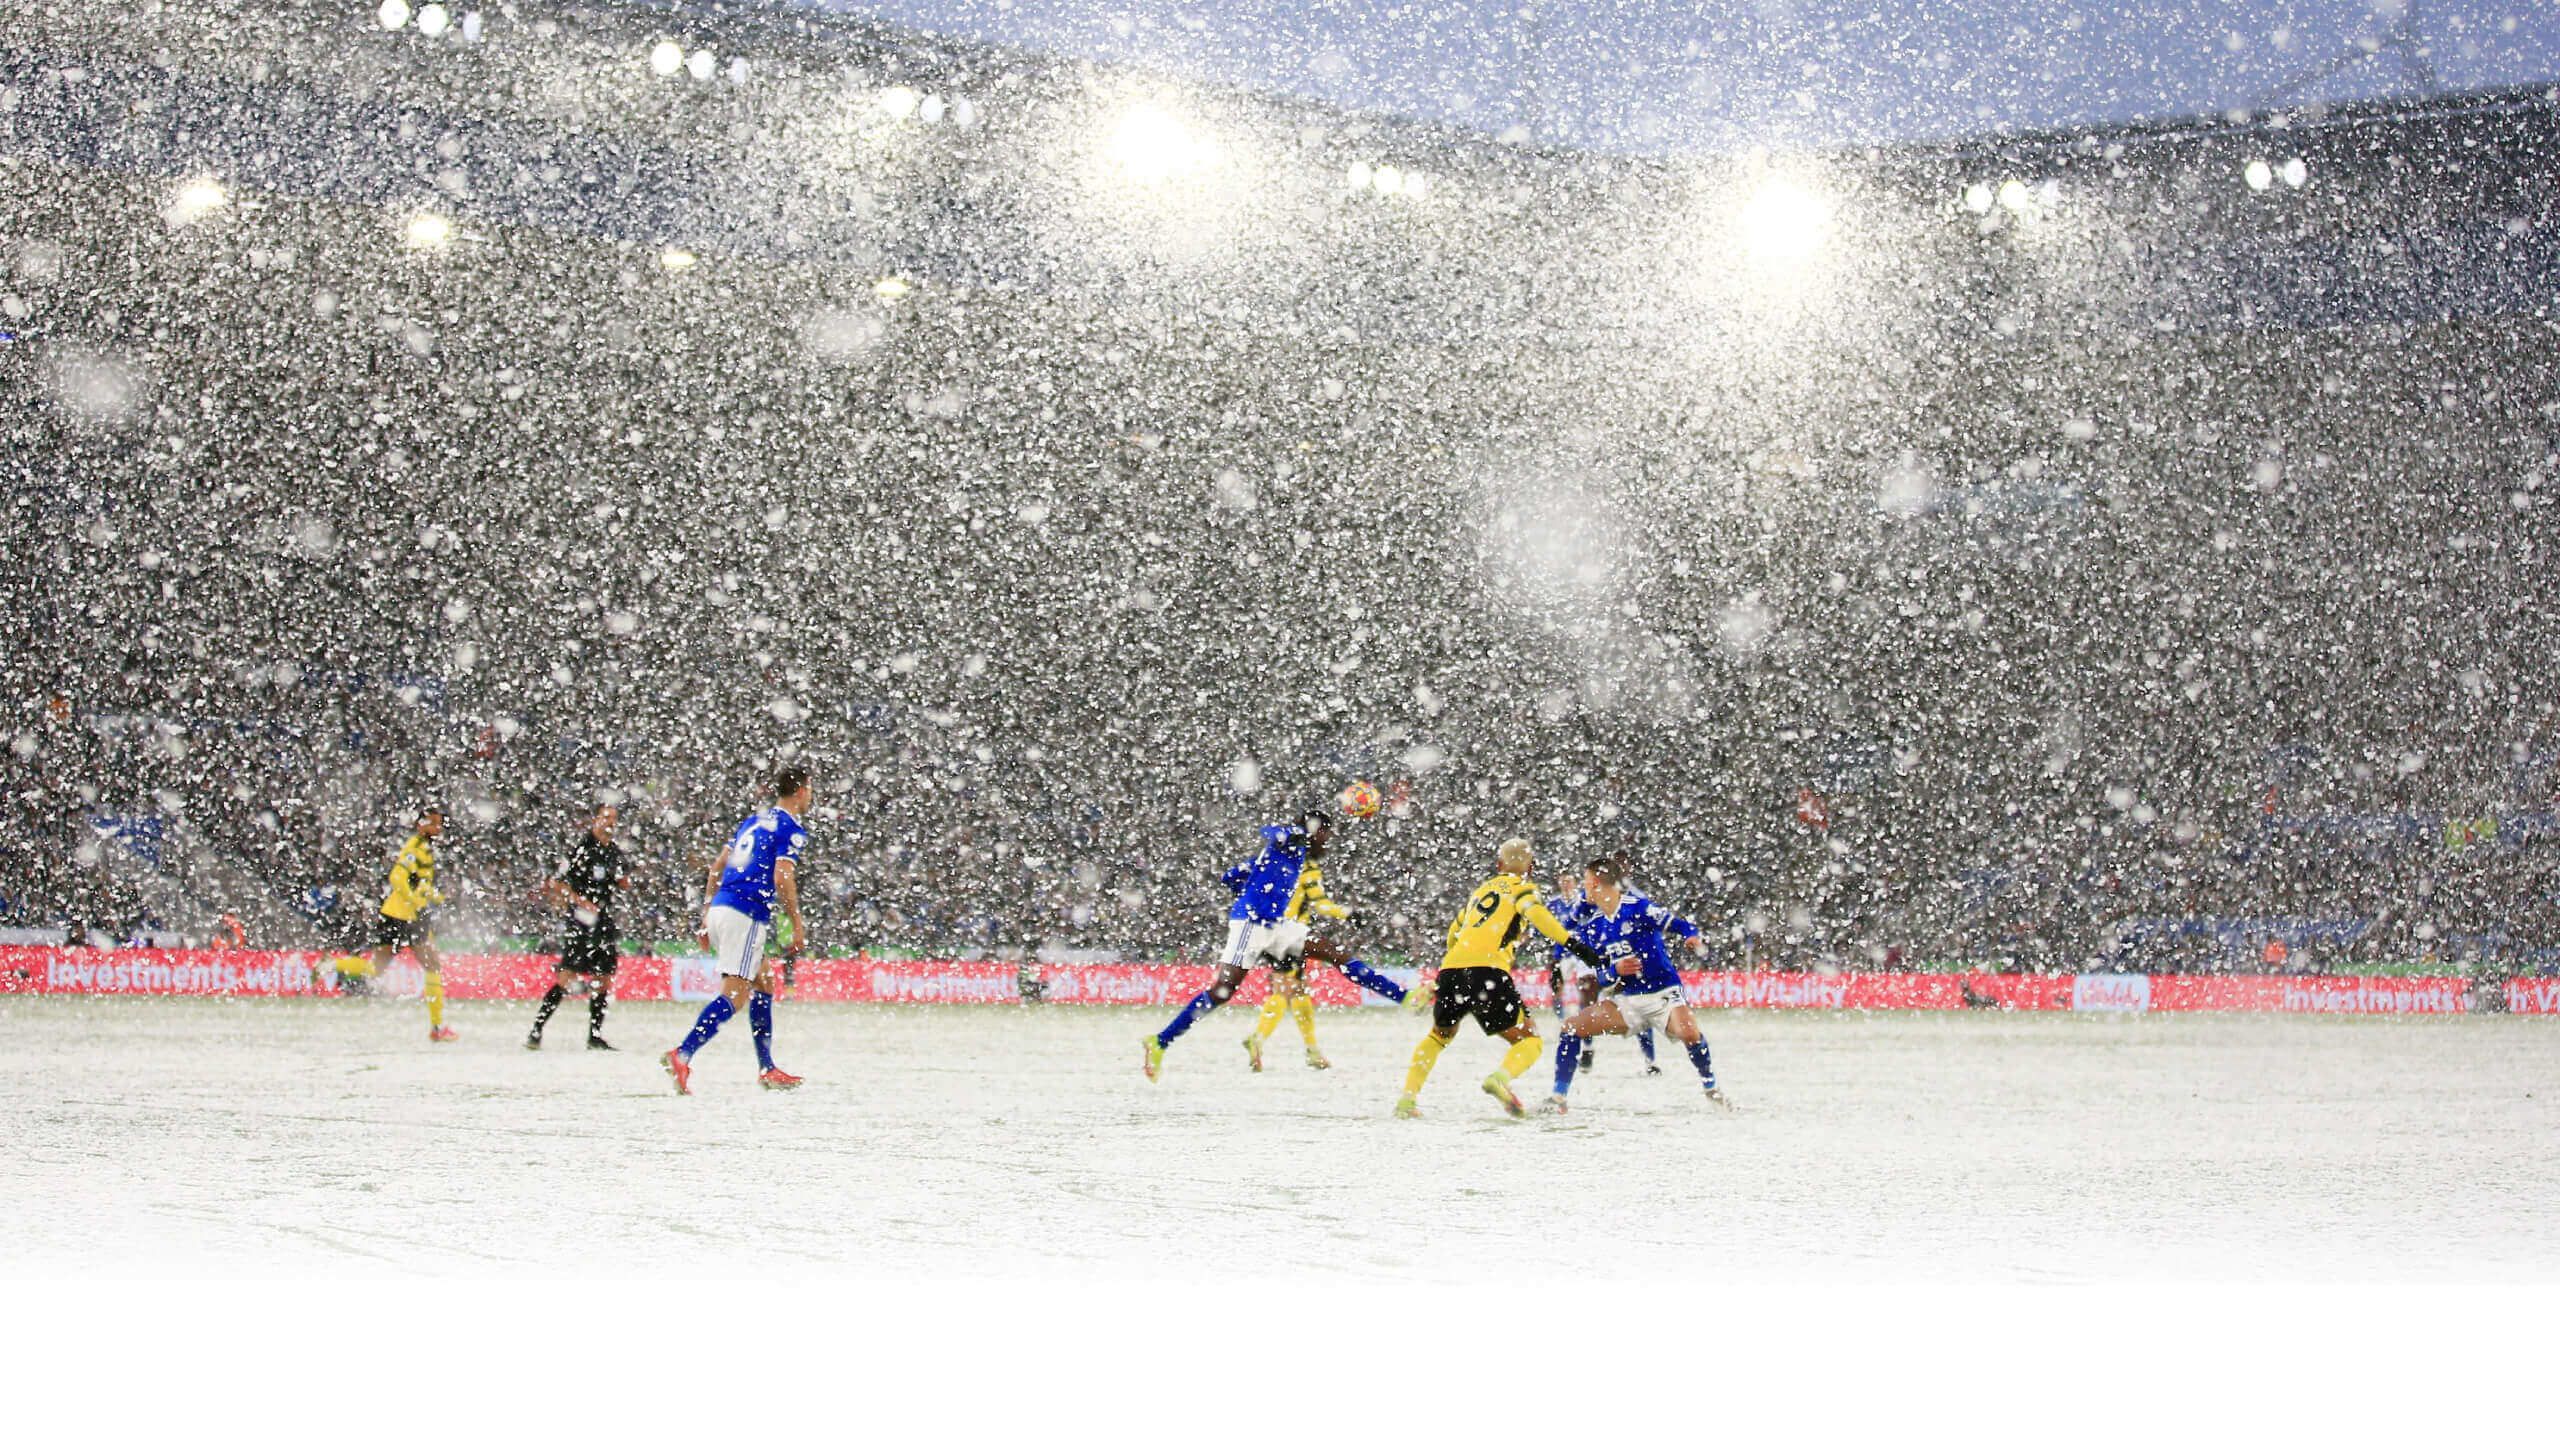 Leicester v Watford in the snow